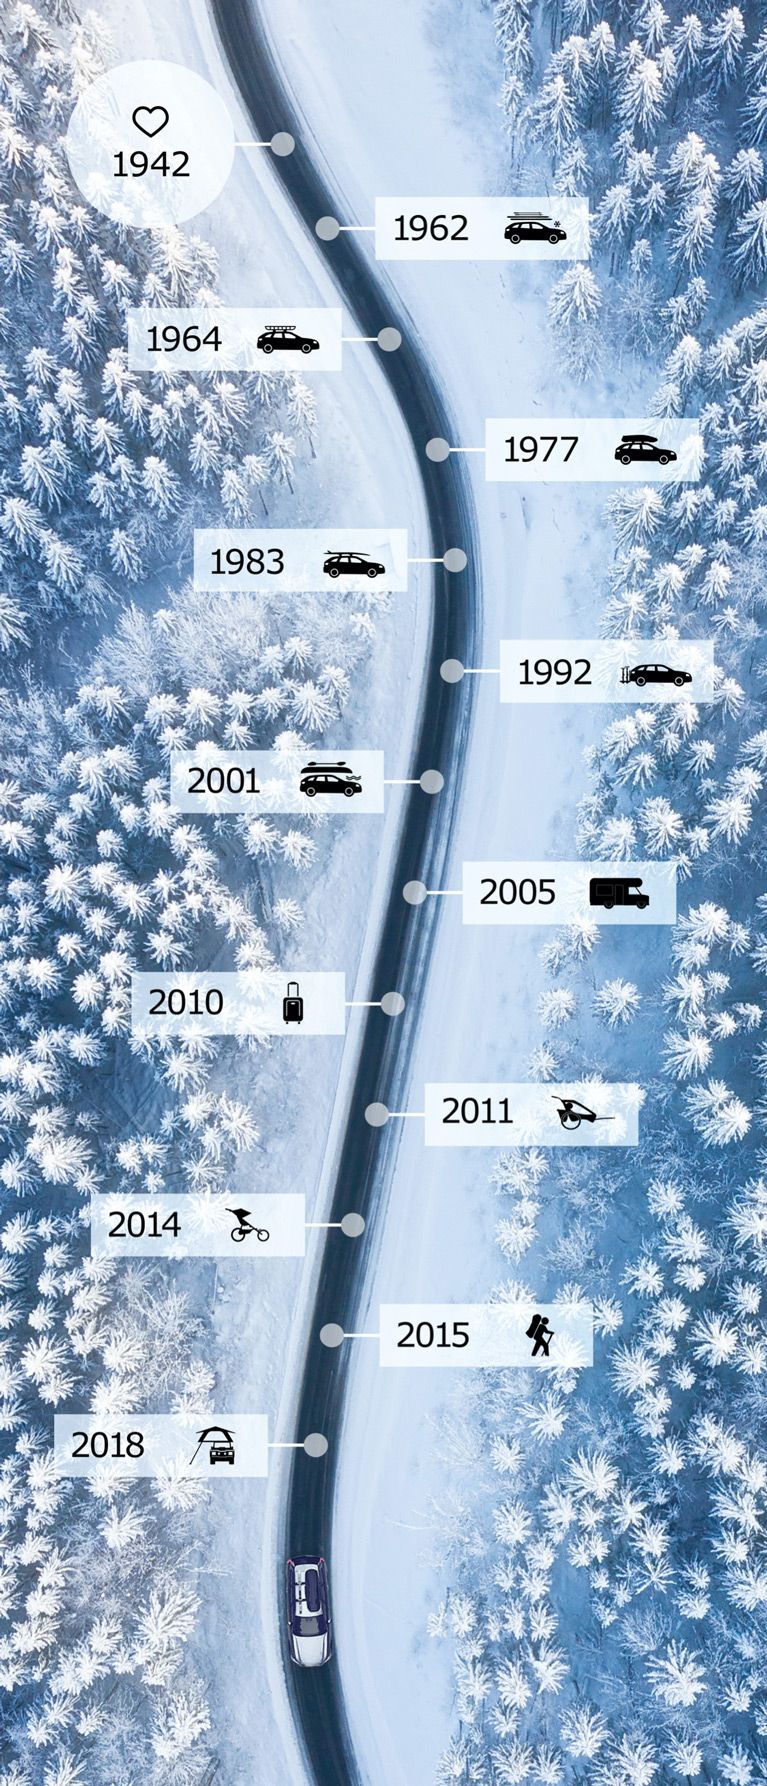 Thule history lane from 1942  up to today. Snowcovered treetops from above with a road running in the middle. 